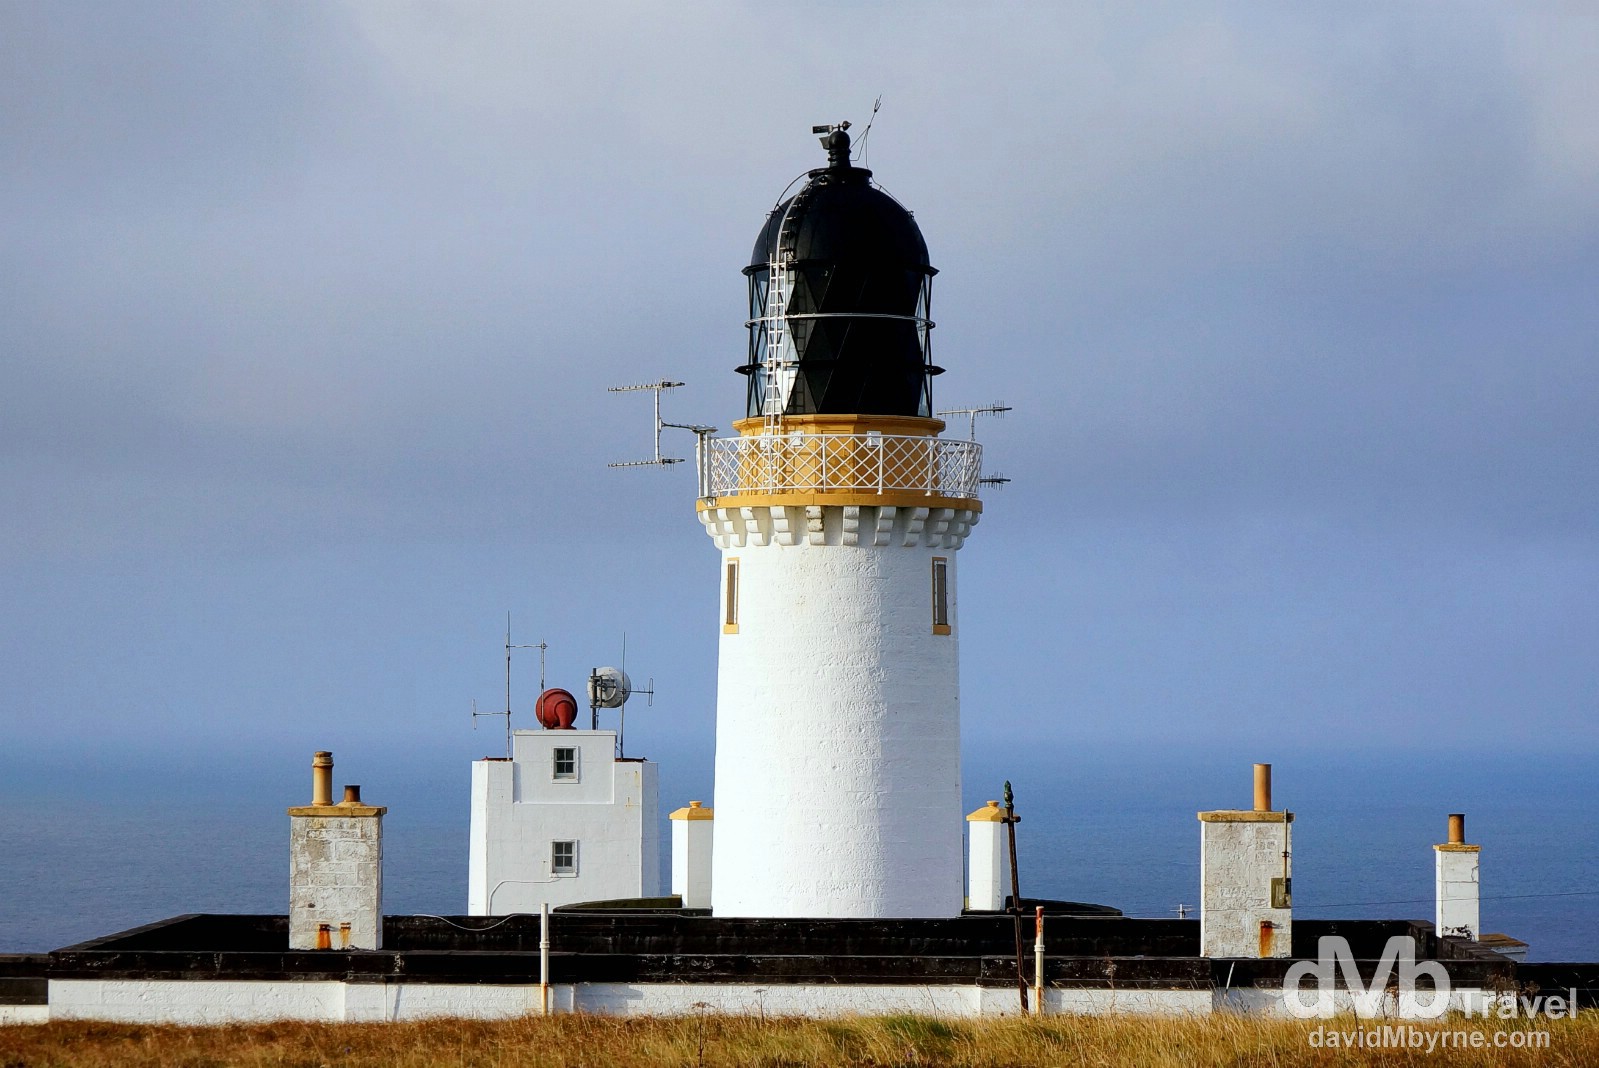 The lighthouse on Dunnet Head, the most northerly point on the British mainland. Dunnet Head, Scotland. September 14, 2014.